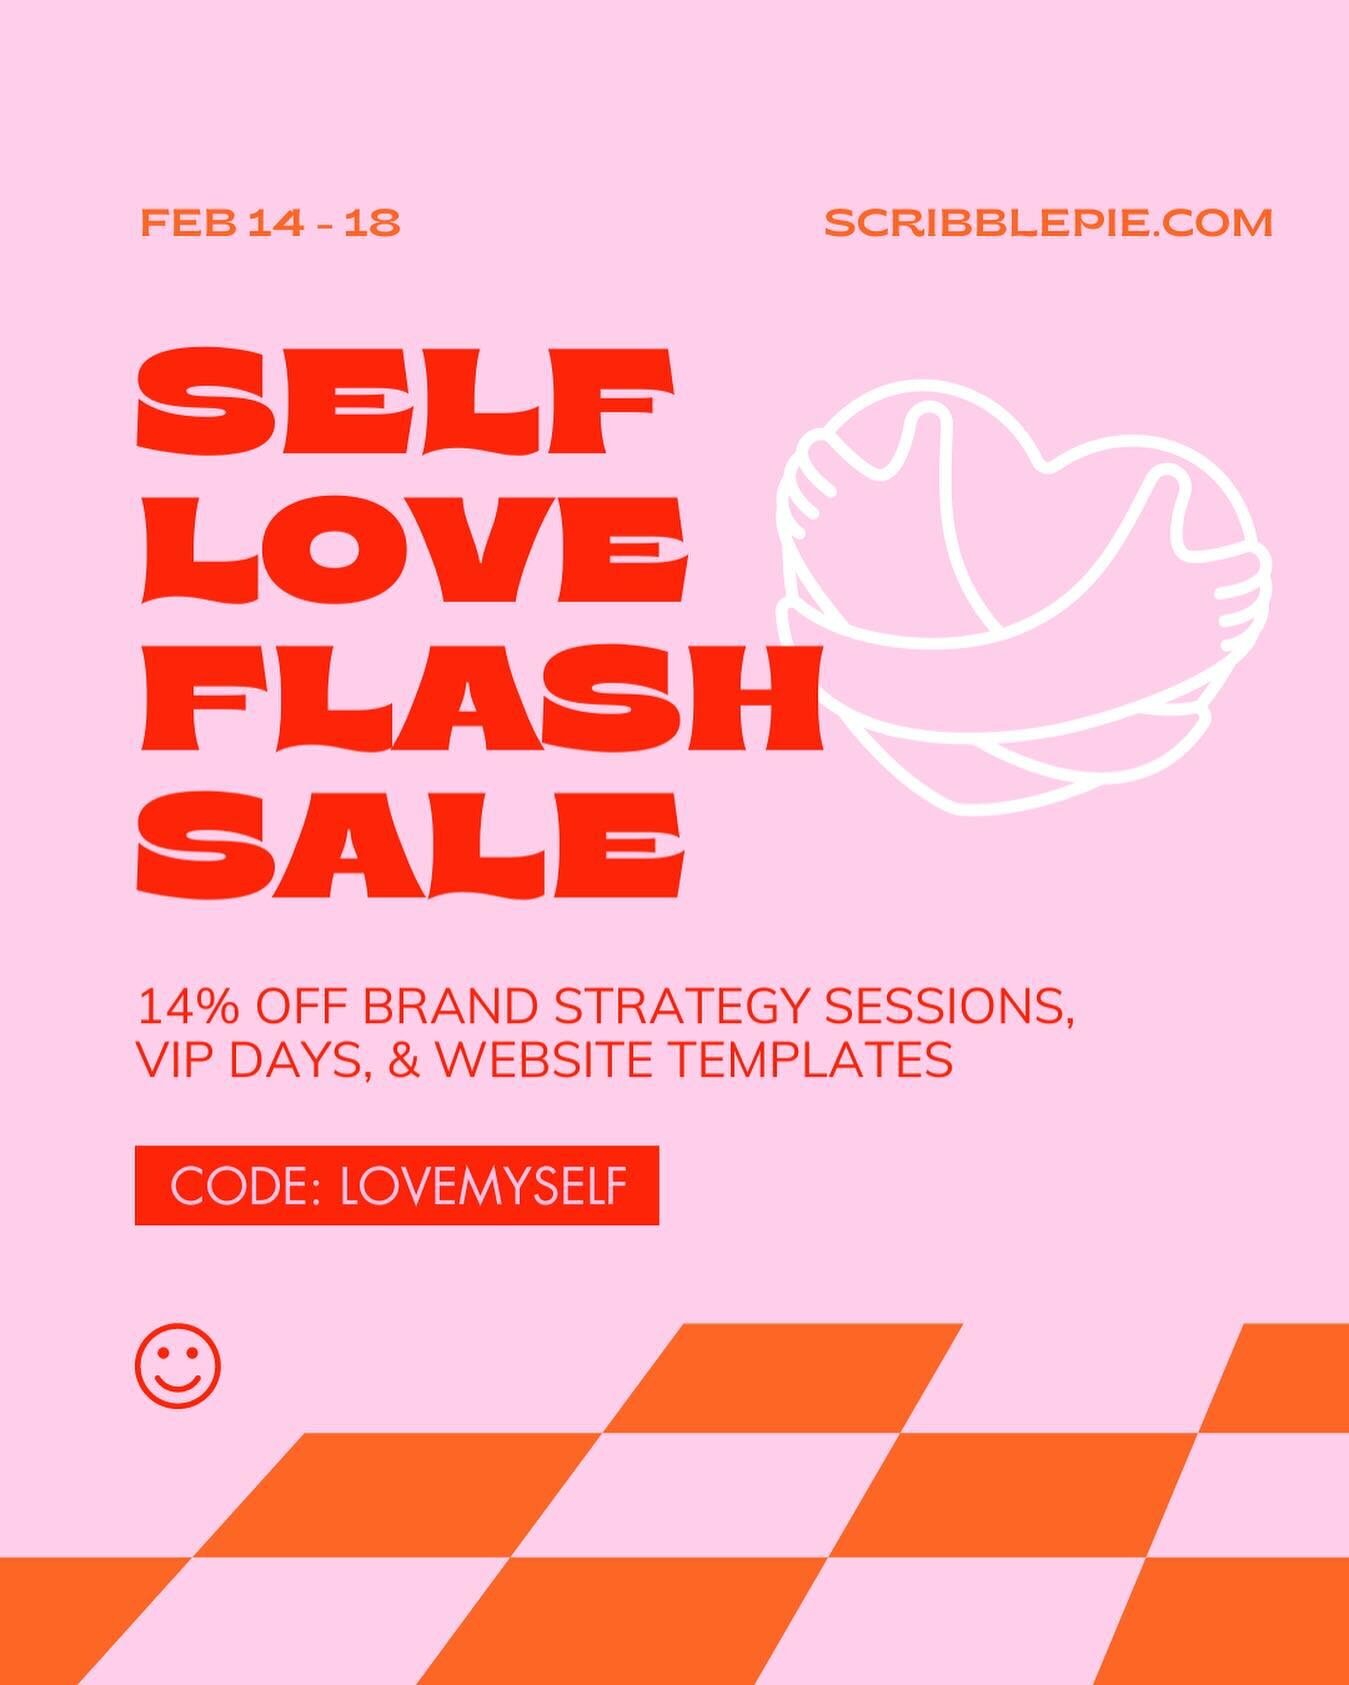 Does your branding or website need a little lovin? There&rsquo;s a cutie flash sale going on over at scribblepie.com! Snag 14% off on biz strategy sessions, VIP Days &amp; website templates 💕

This is for you if you&rsquo;re ready to revamp your bra